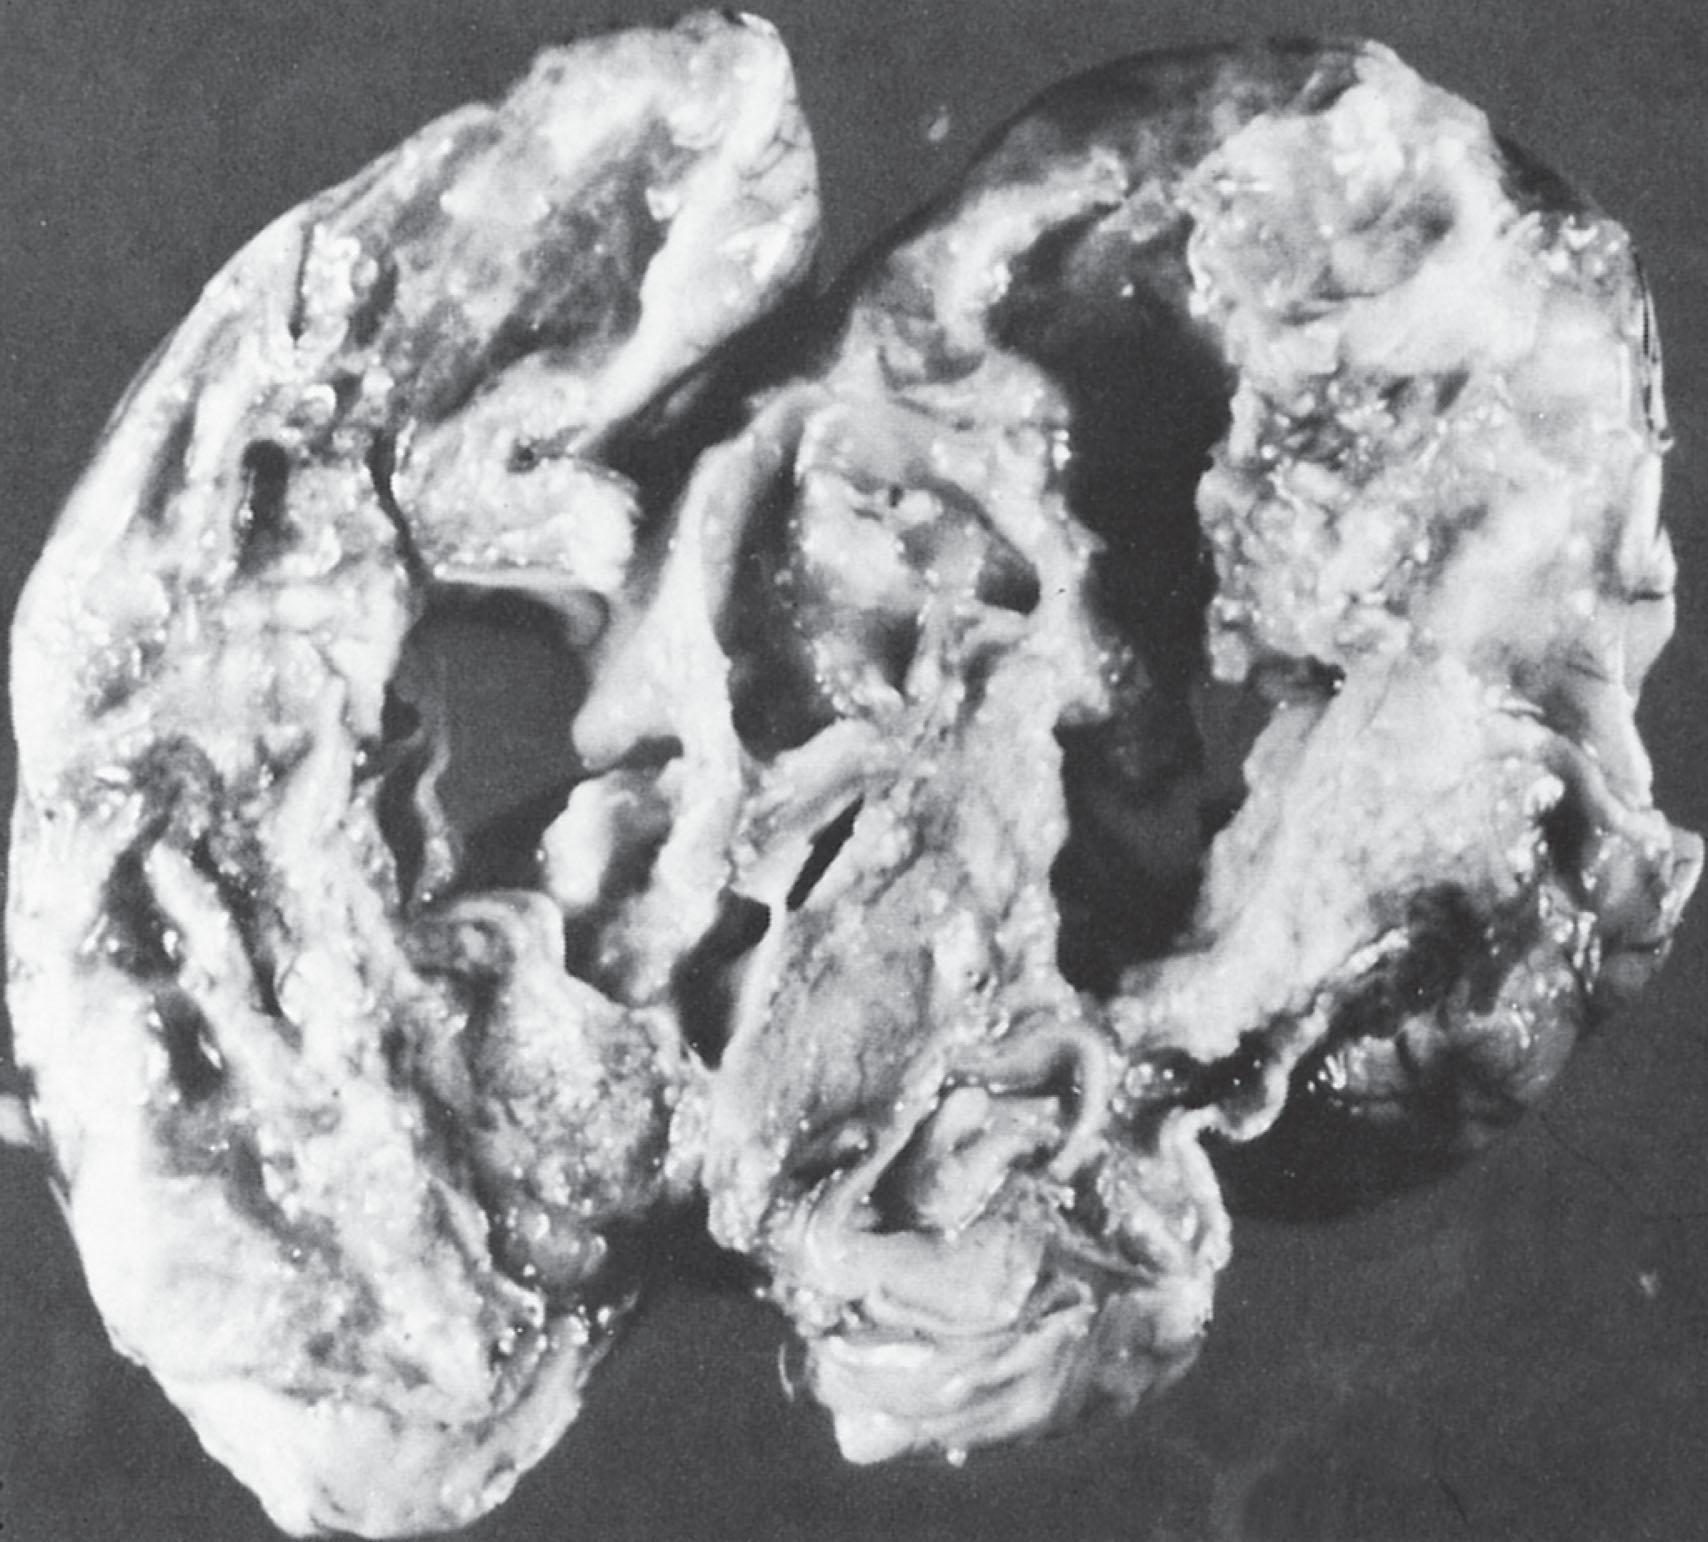 Fig. 39.6, Multicystic encephalomalacia following neonatal bacterial meningitis: neuropathology. From an infant with neonatal gram-negative bacterial meningitis who died at 5 weeks of age. This coronal section of the cerebrum shows that the cerebral hemispheres have been converted into a necrotic mass with many cystic cavities of various sizes. The corpus callosum is necrotic, and the ventricles cannot be delineated from cystic spaces in the brain.